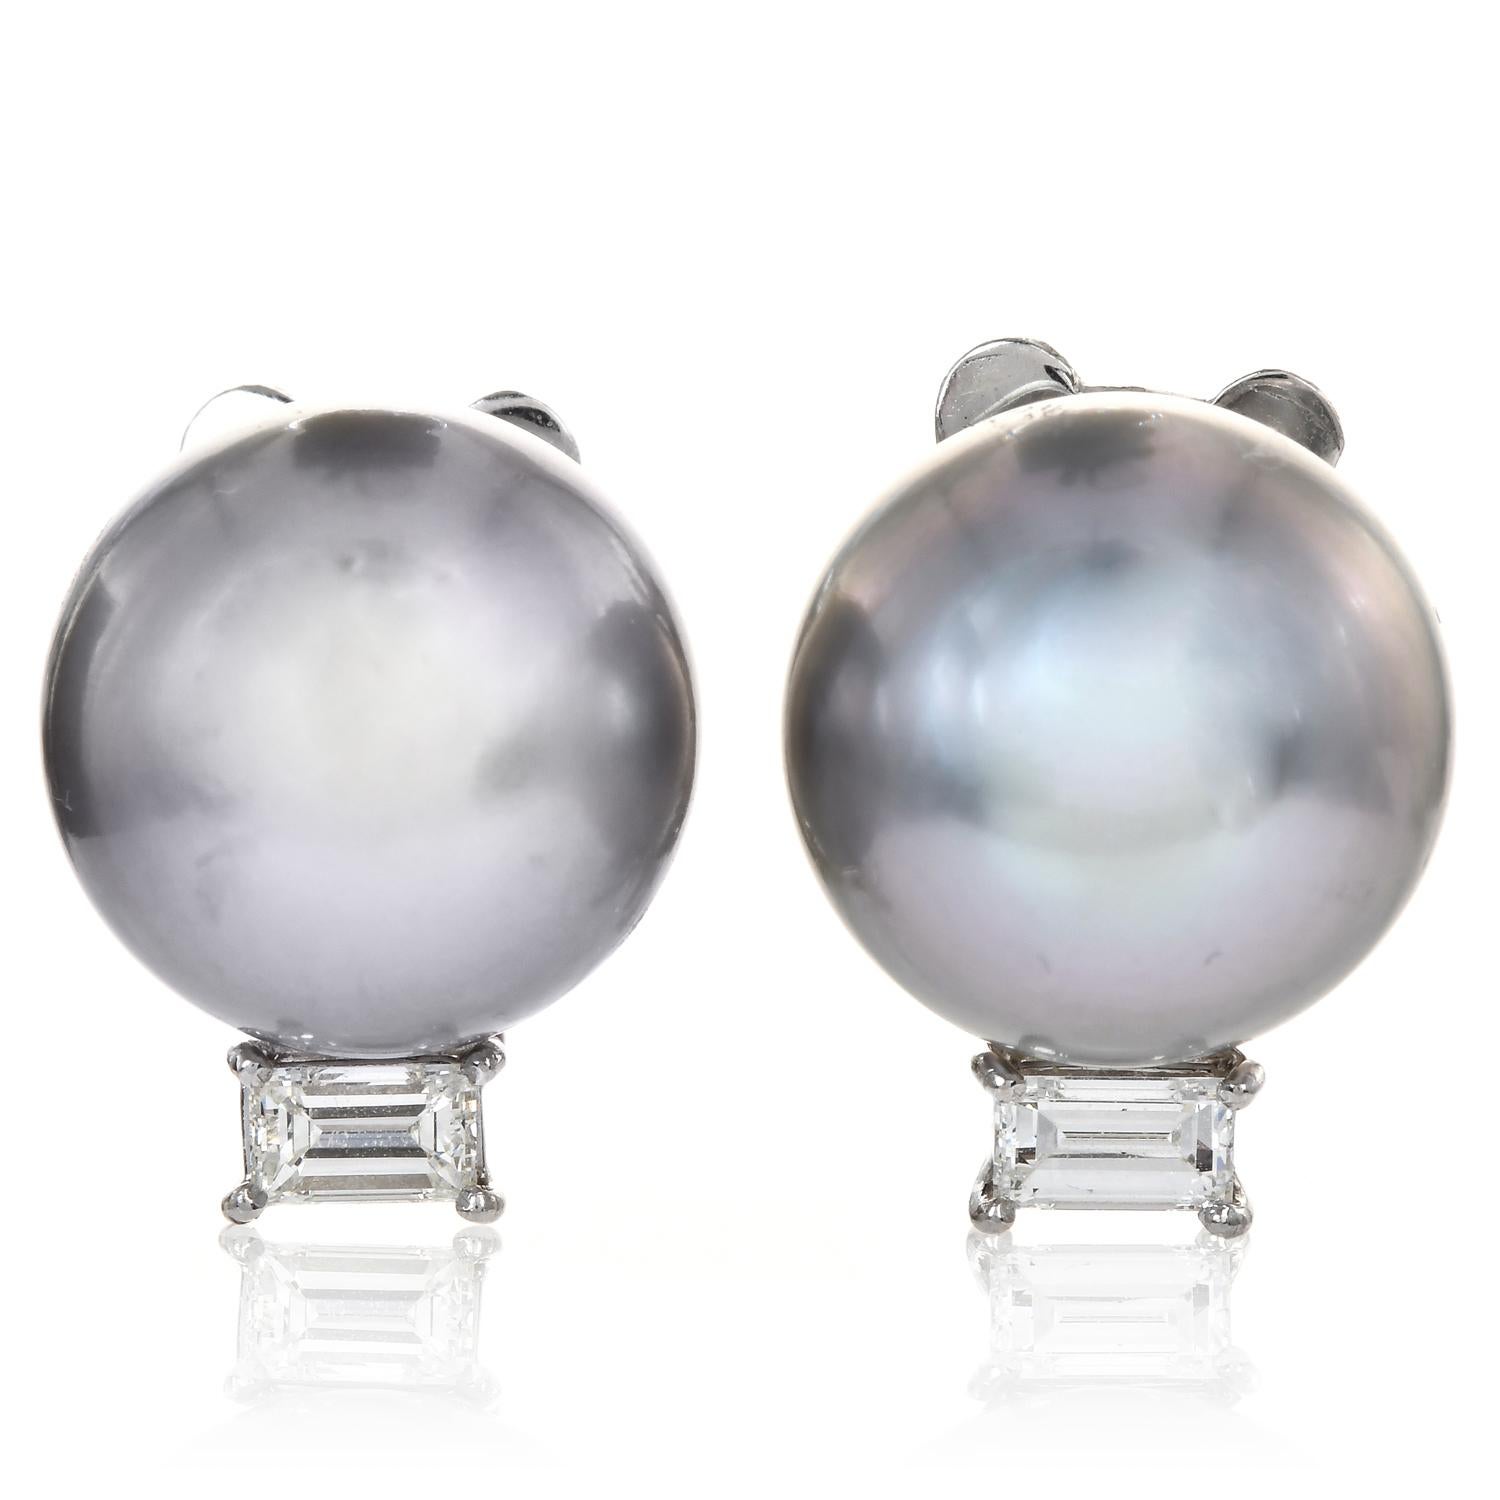 These jumbo genuine South sea earrings are created in platinum gold.

these beautiful gray-color South Sea Pearls High Lusters are very smooth with few minor blemishes, measuring each approx. 14mm in diameter each,

each earring has been topped with